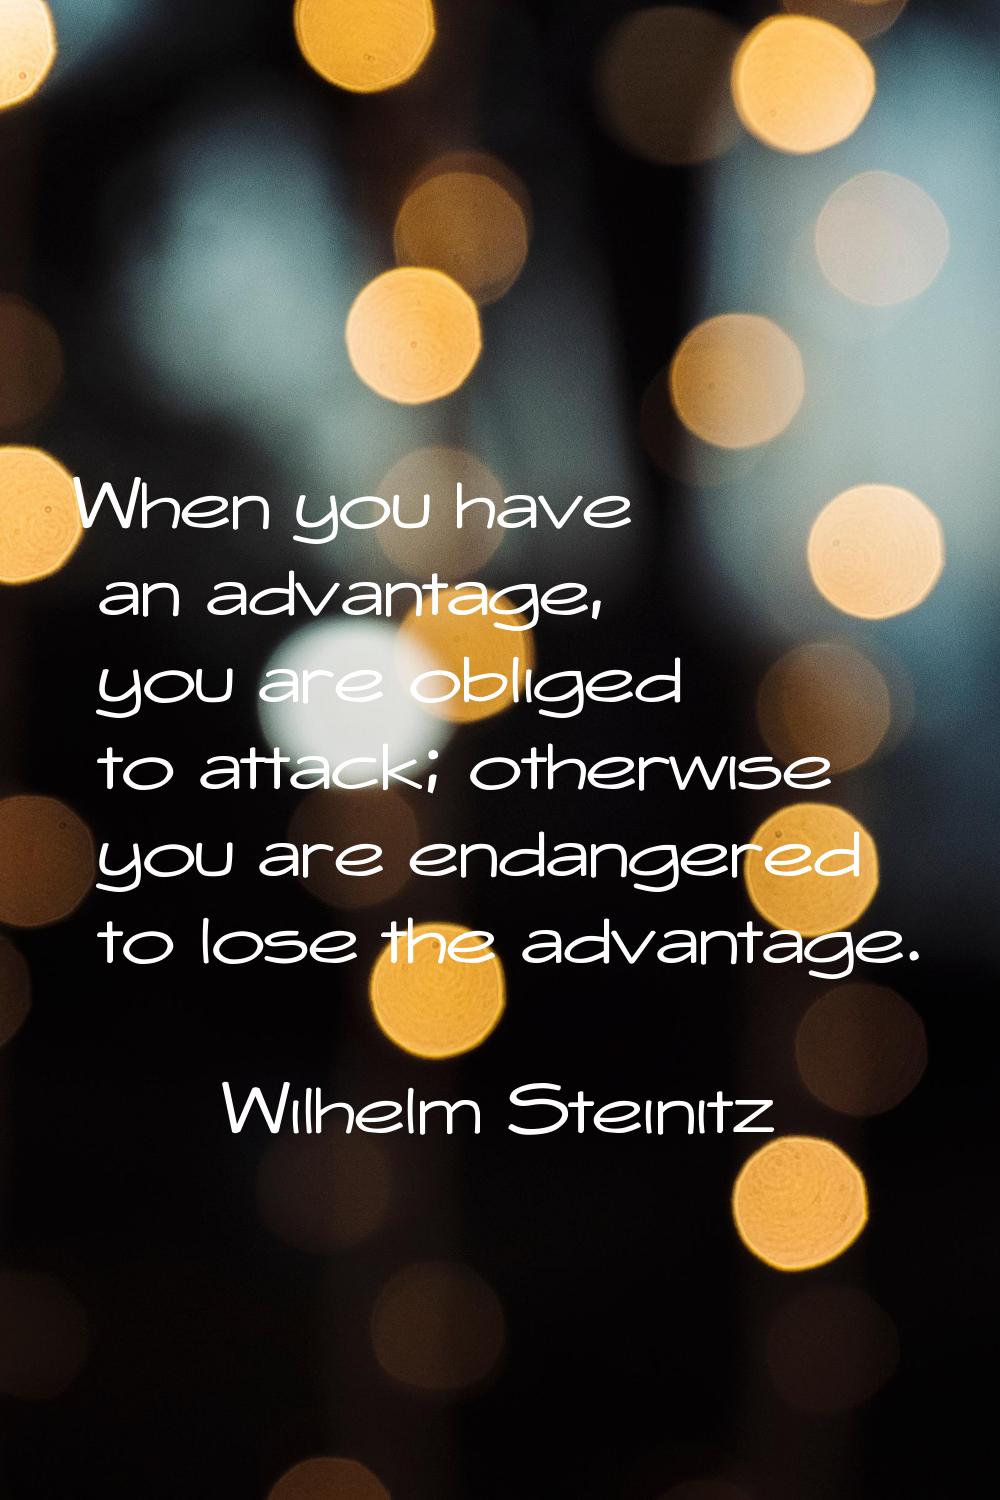 When you have an advantage, you are obliged to attack; otherwise you are endangered to lose the adv